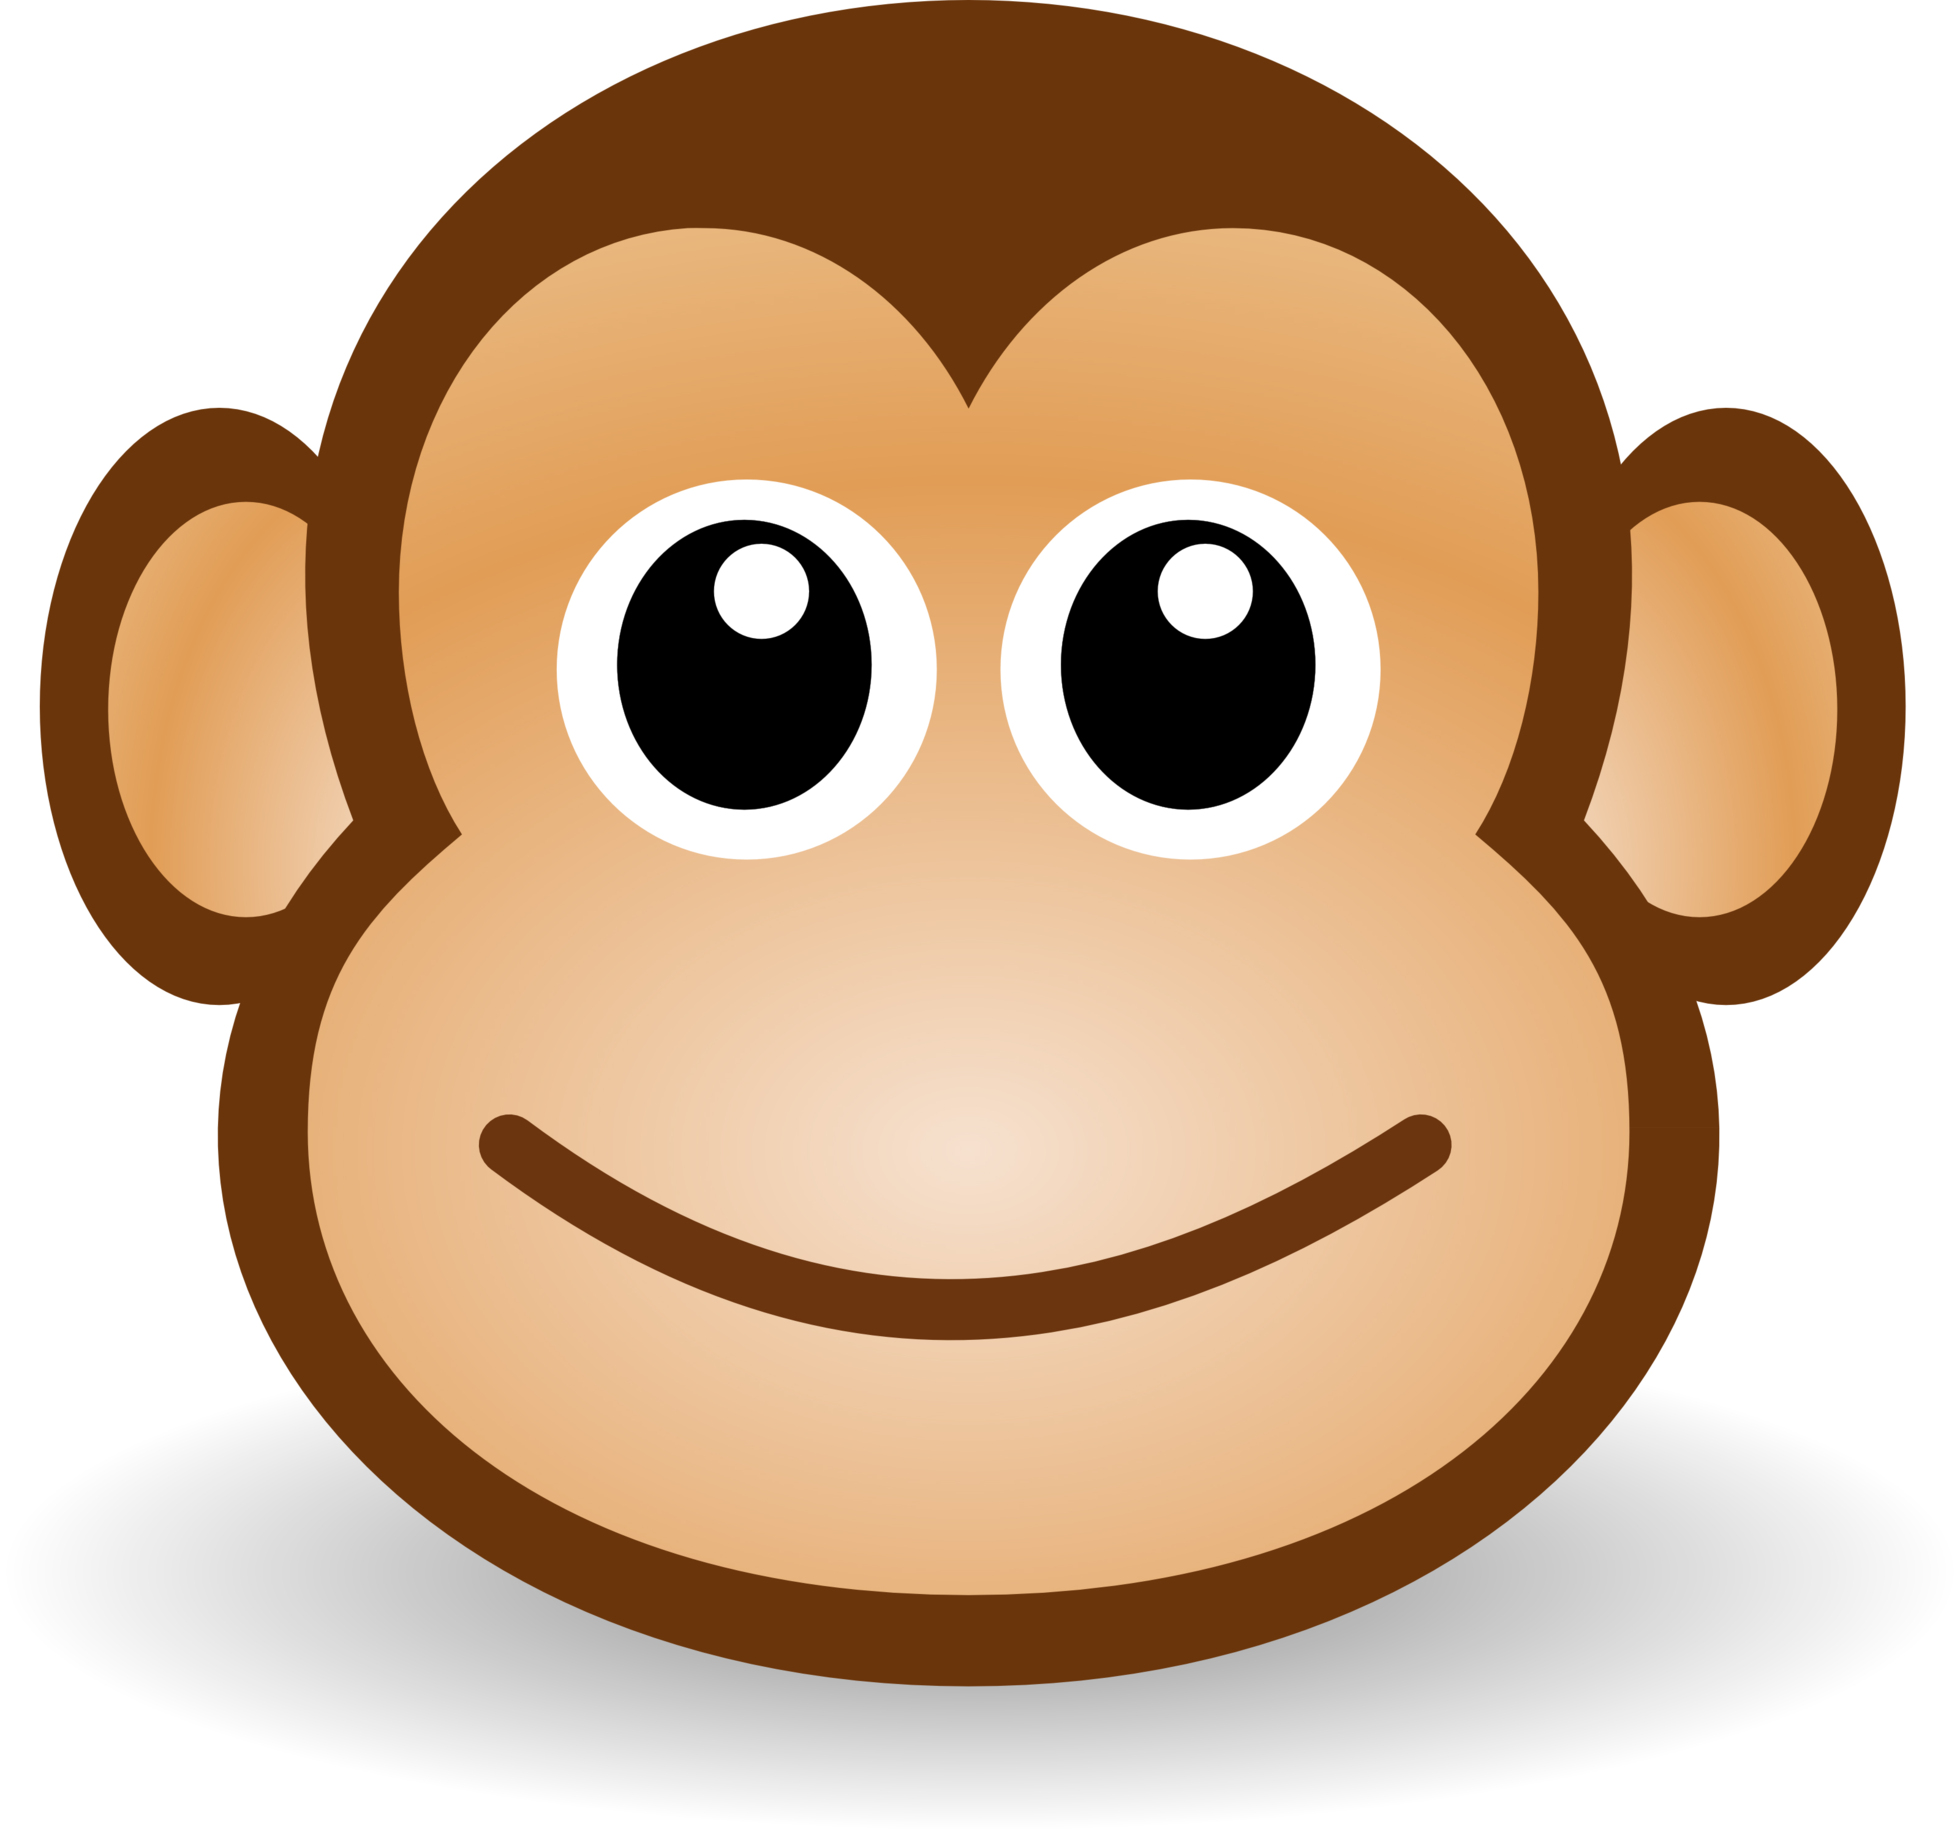 Free Monkey Images, Download Free Clip Art, Free Clip Art on